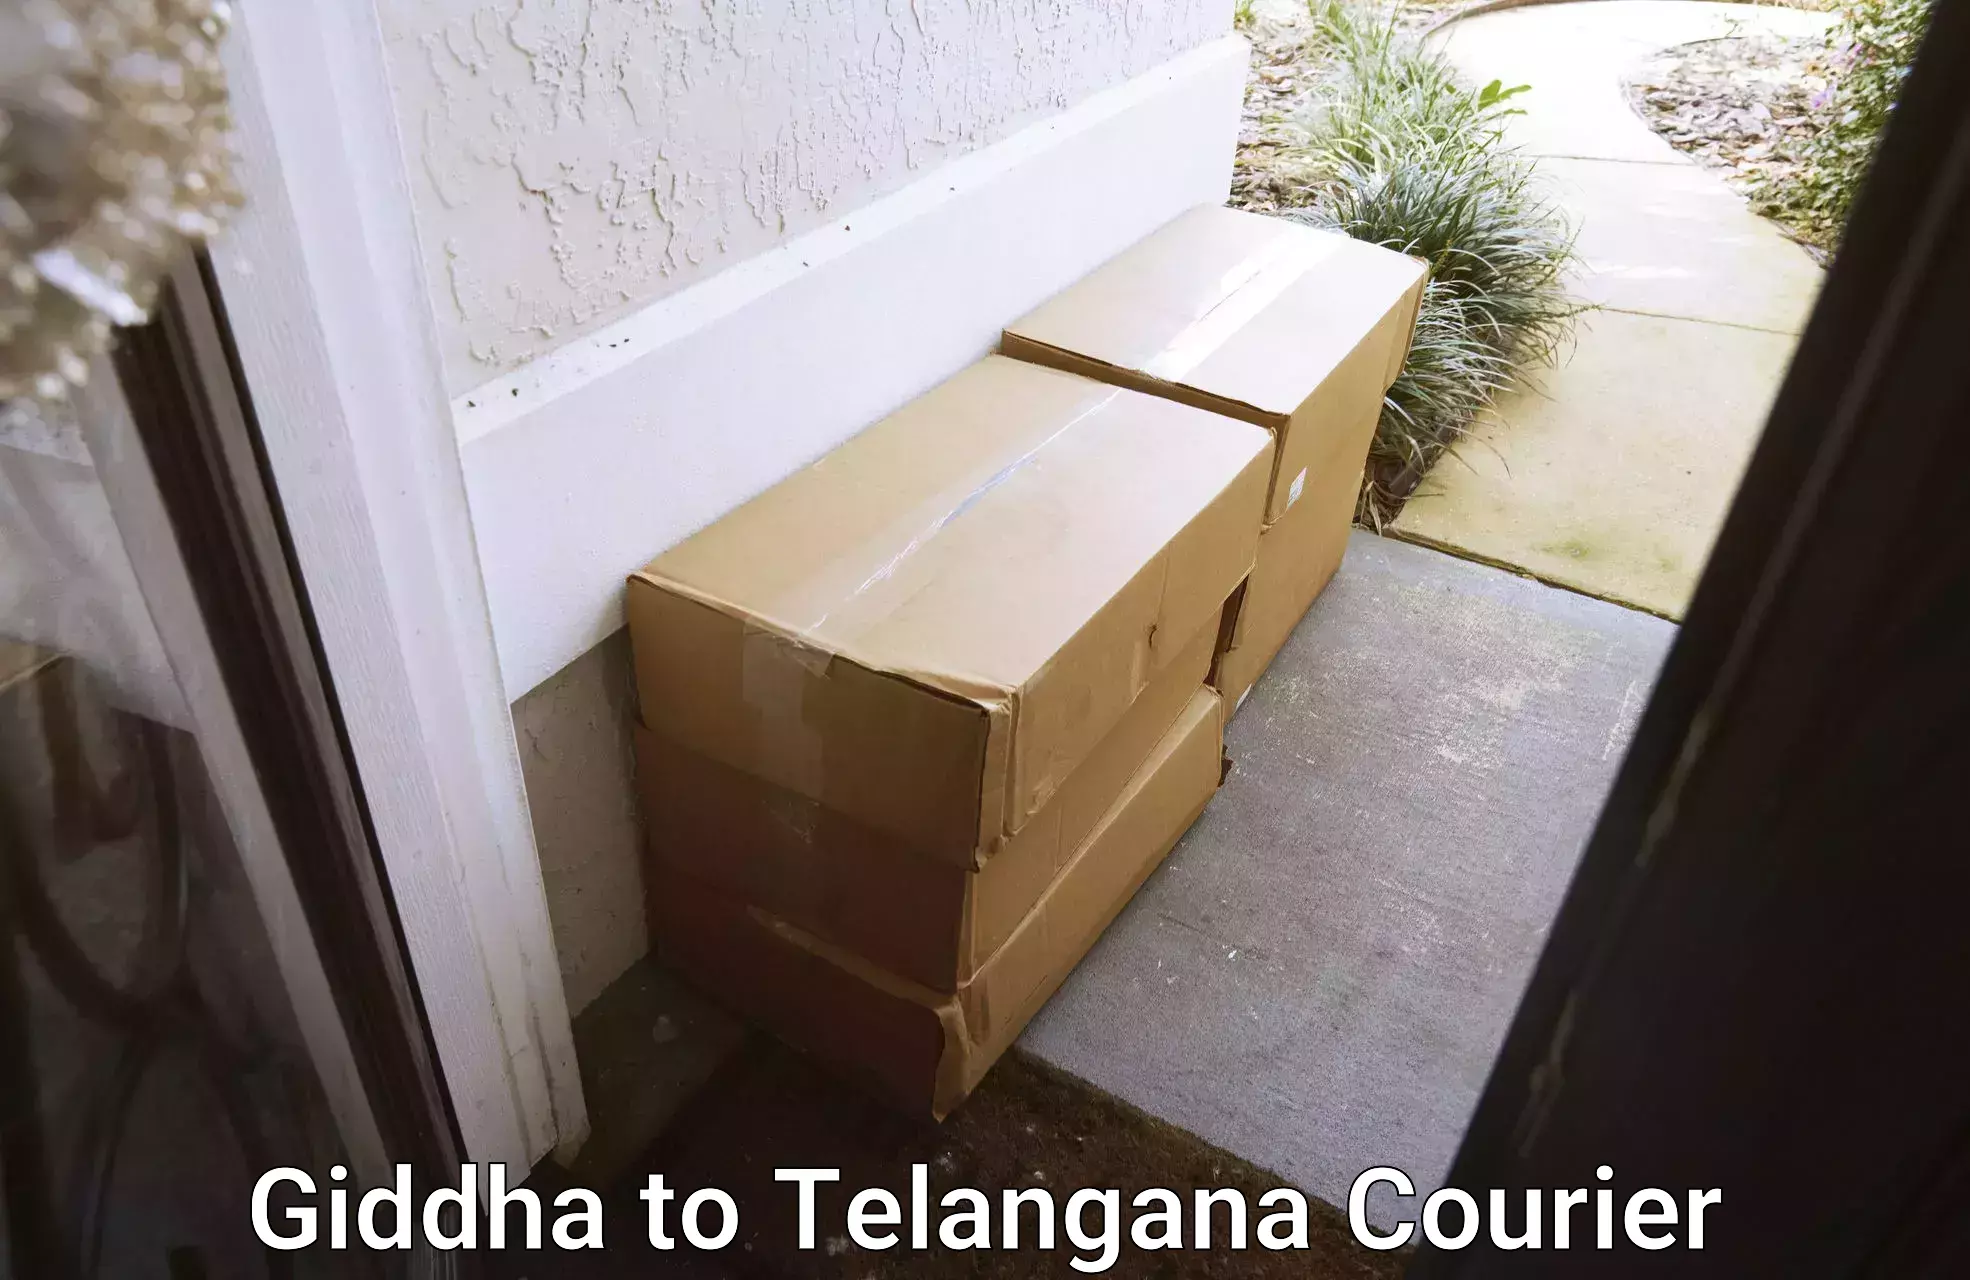 Furniture relocation experts Giddha to Manneguda